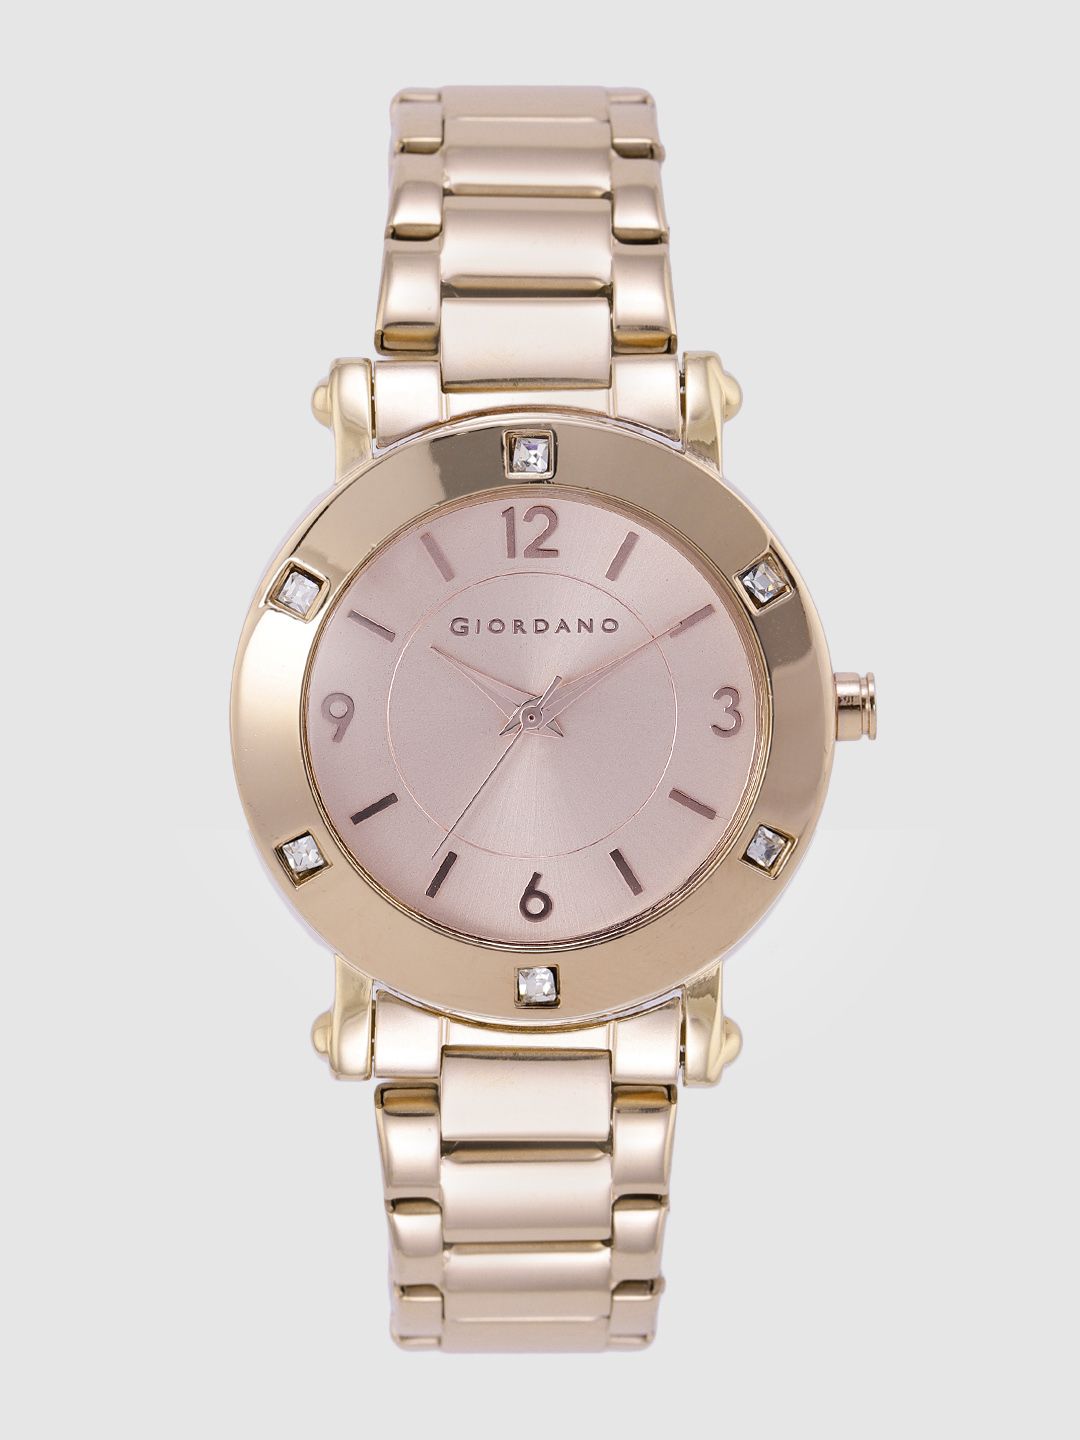 GIORDANO Women Rose Gold-Toned Analogue Watch GD-4031-11 Price in India